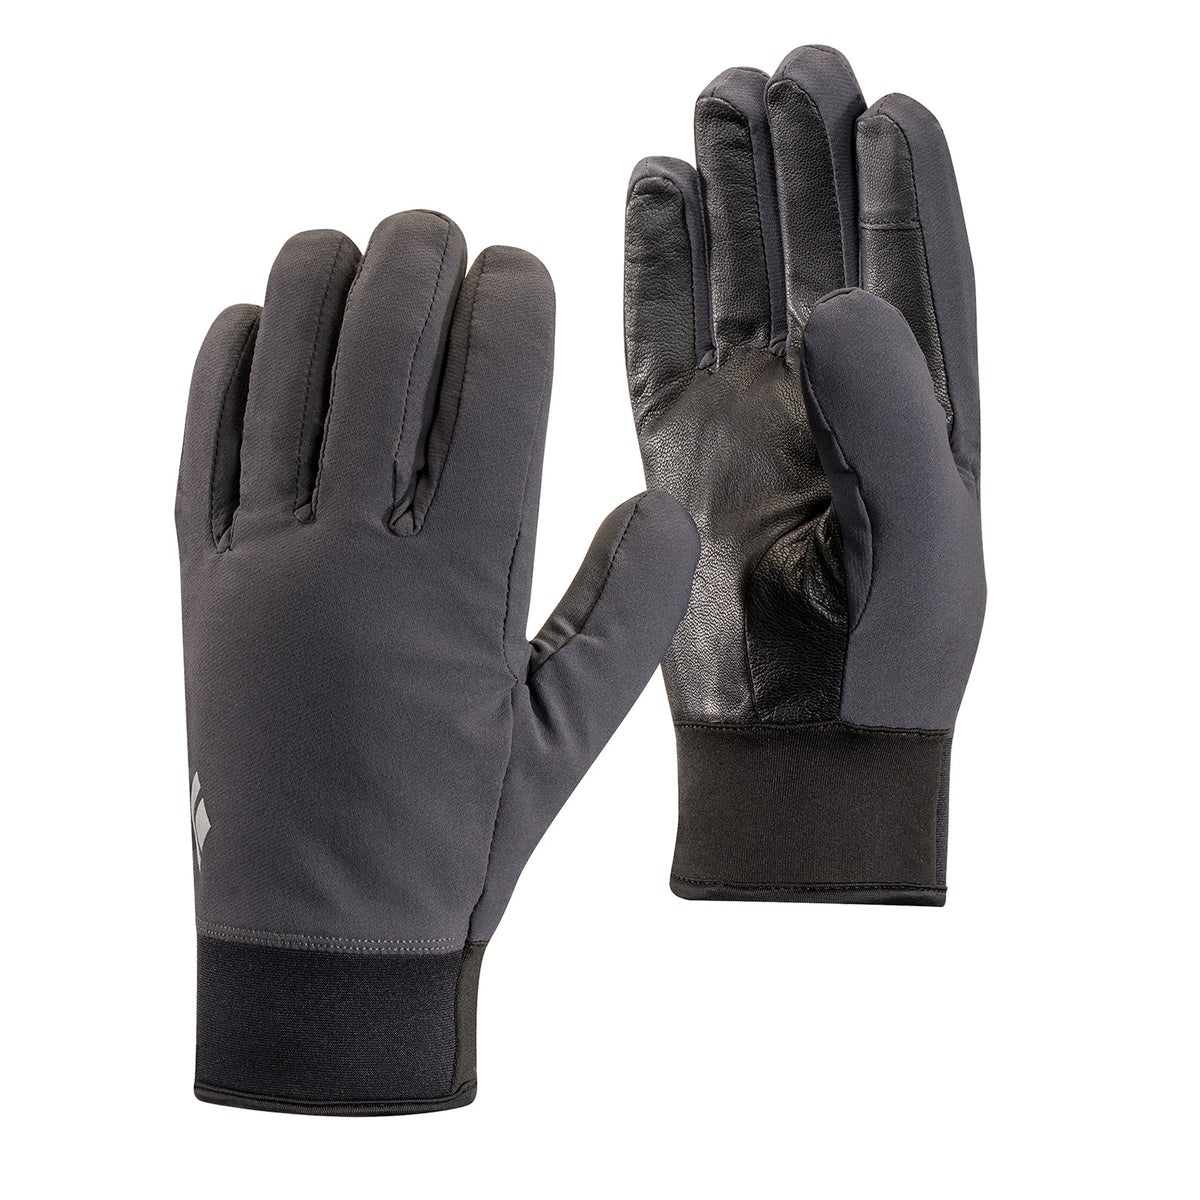 a pair of midweight softshell gloves